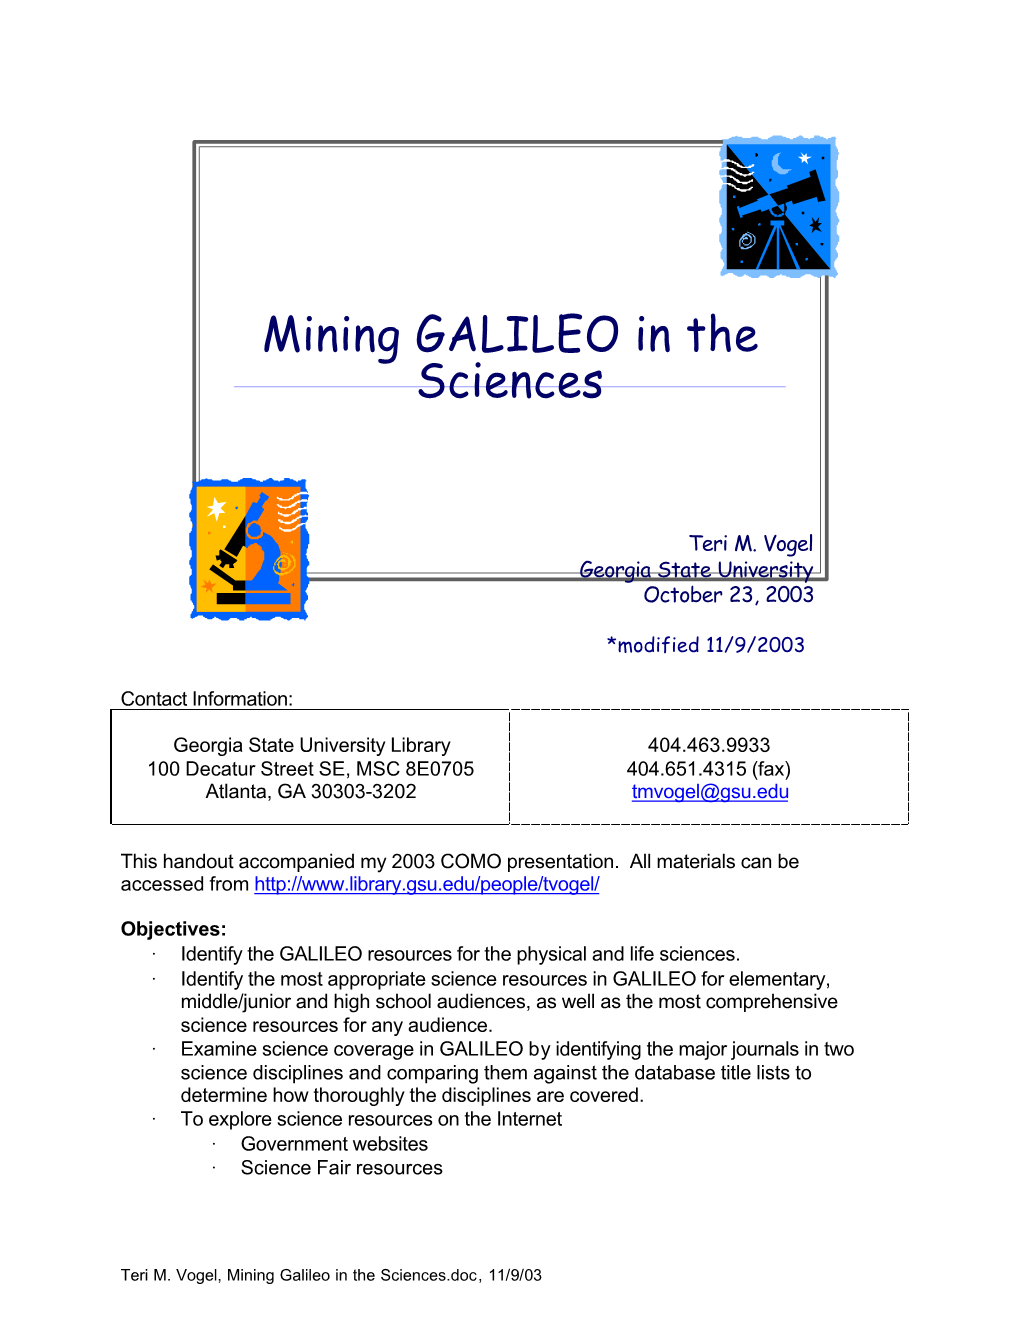 Mining GALILEO in the Sciences